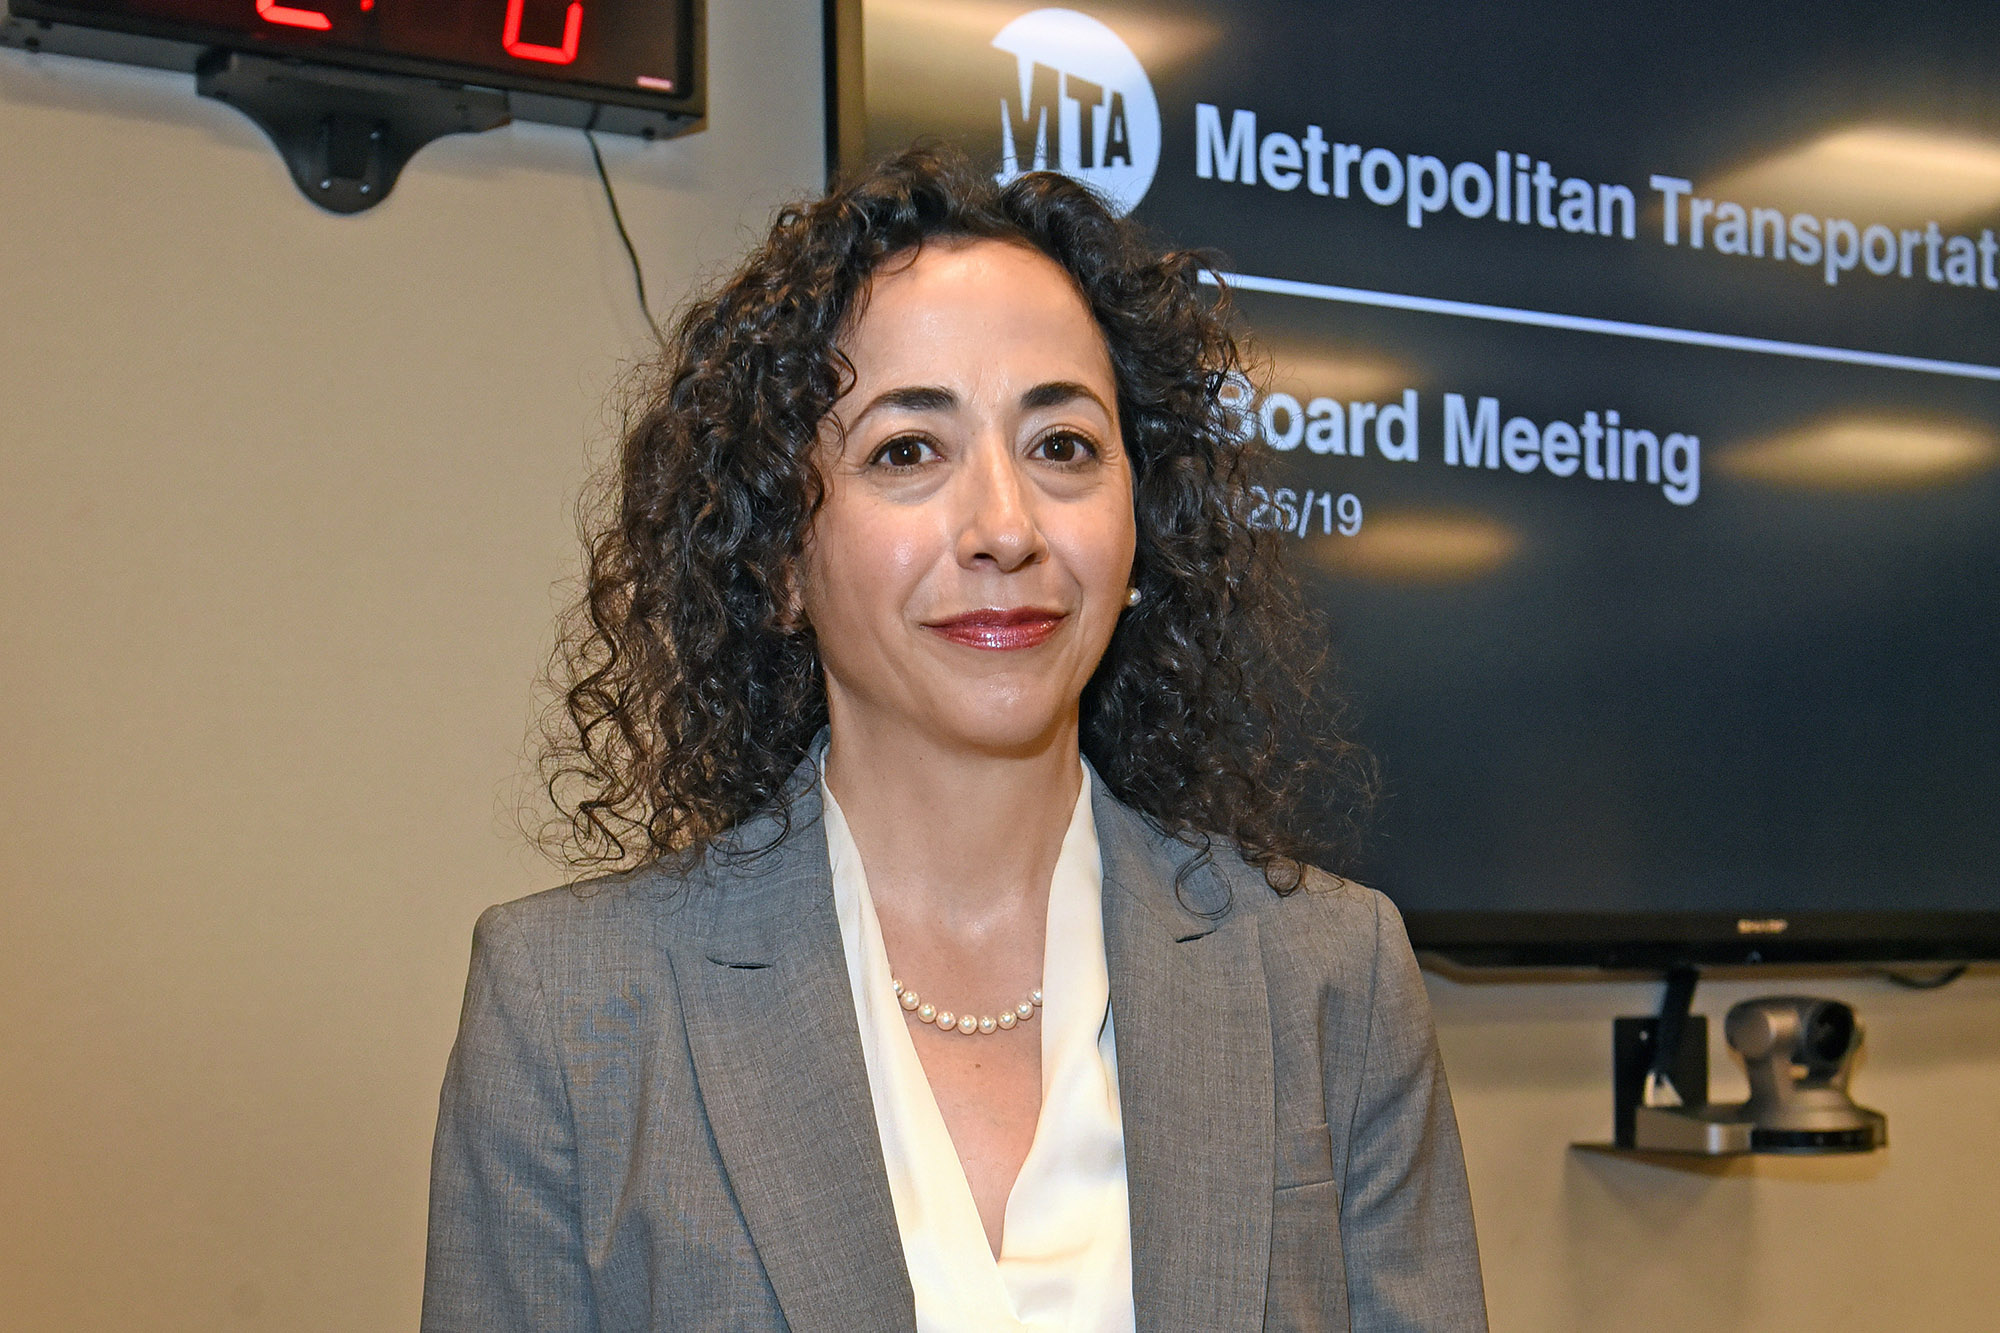 ‘Transferring priorities’ place $31M MTA time beyond law reforms ‘at risk’